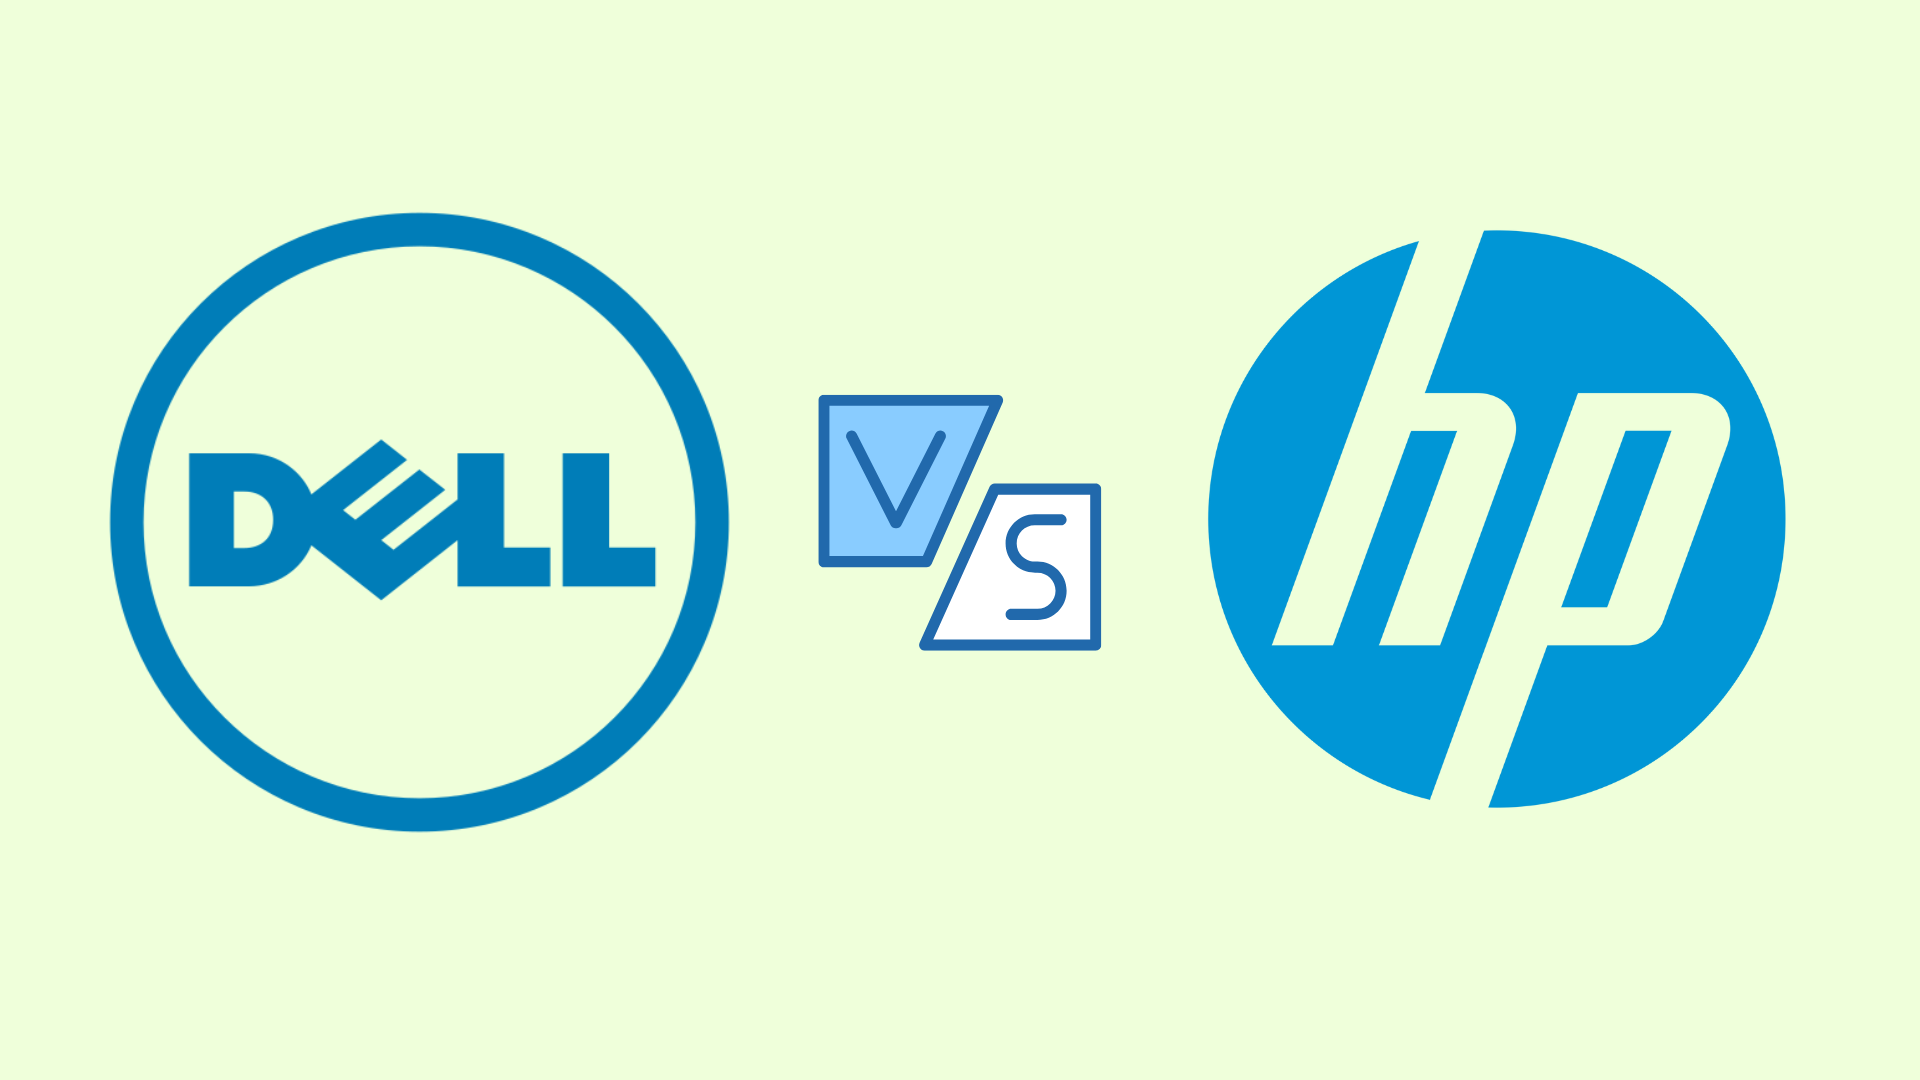 Dell vs HP which brand is better